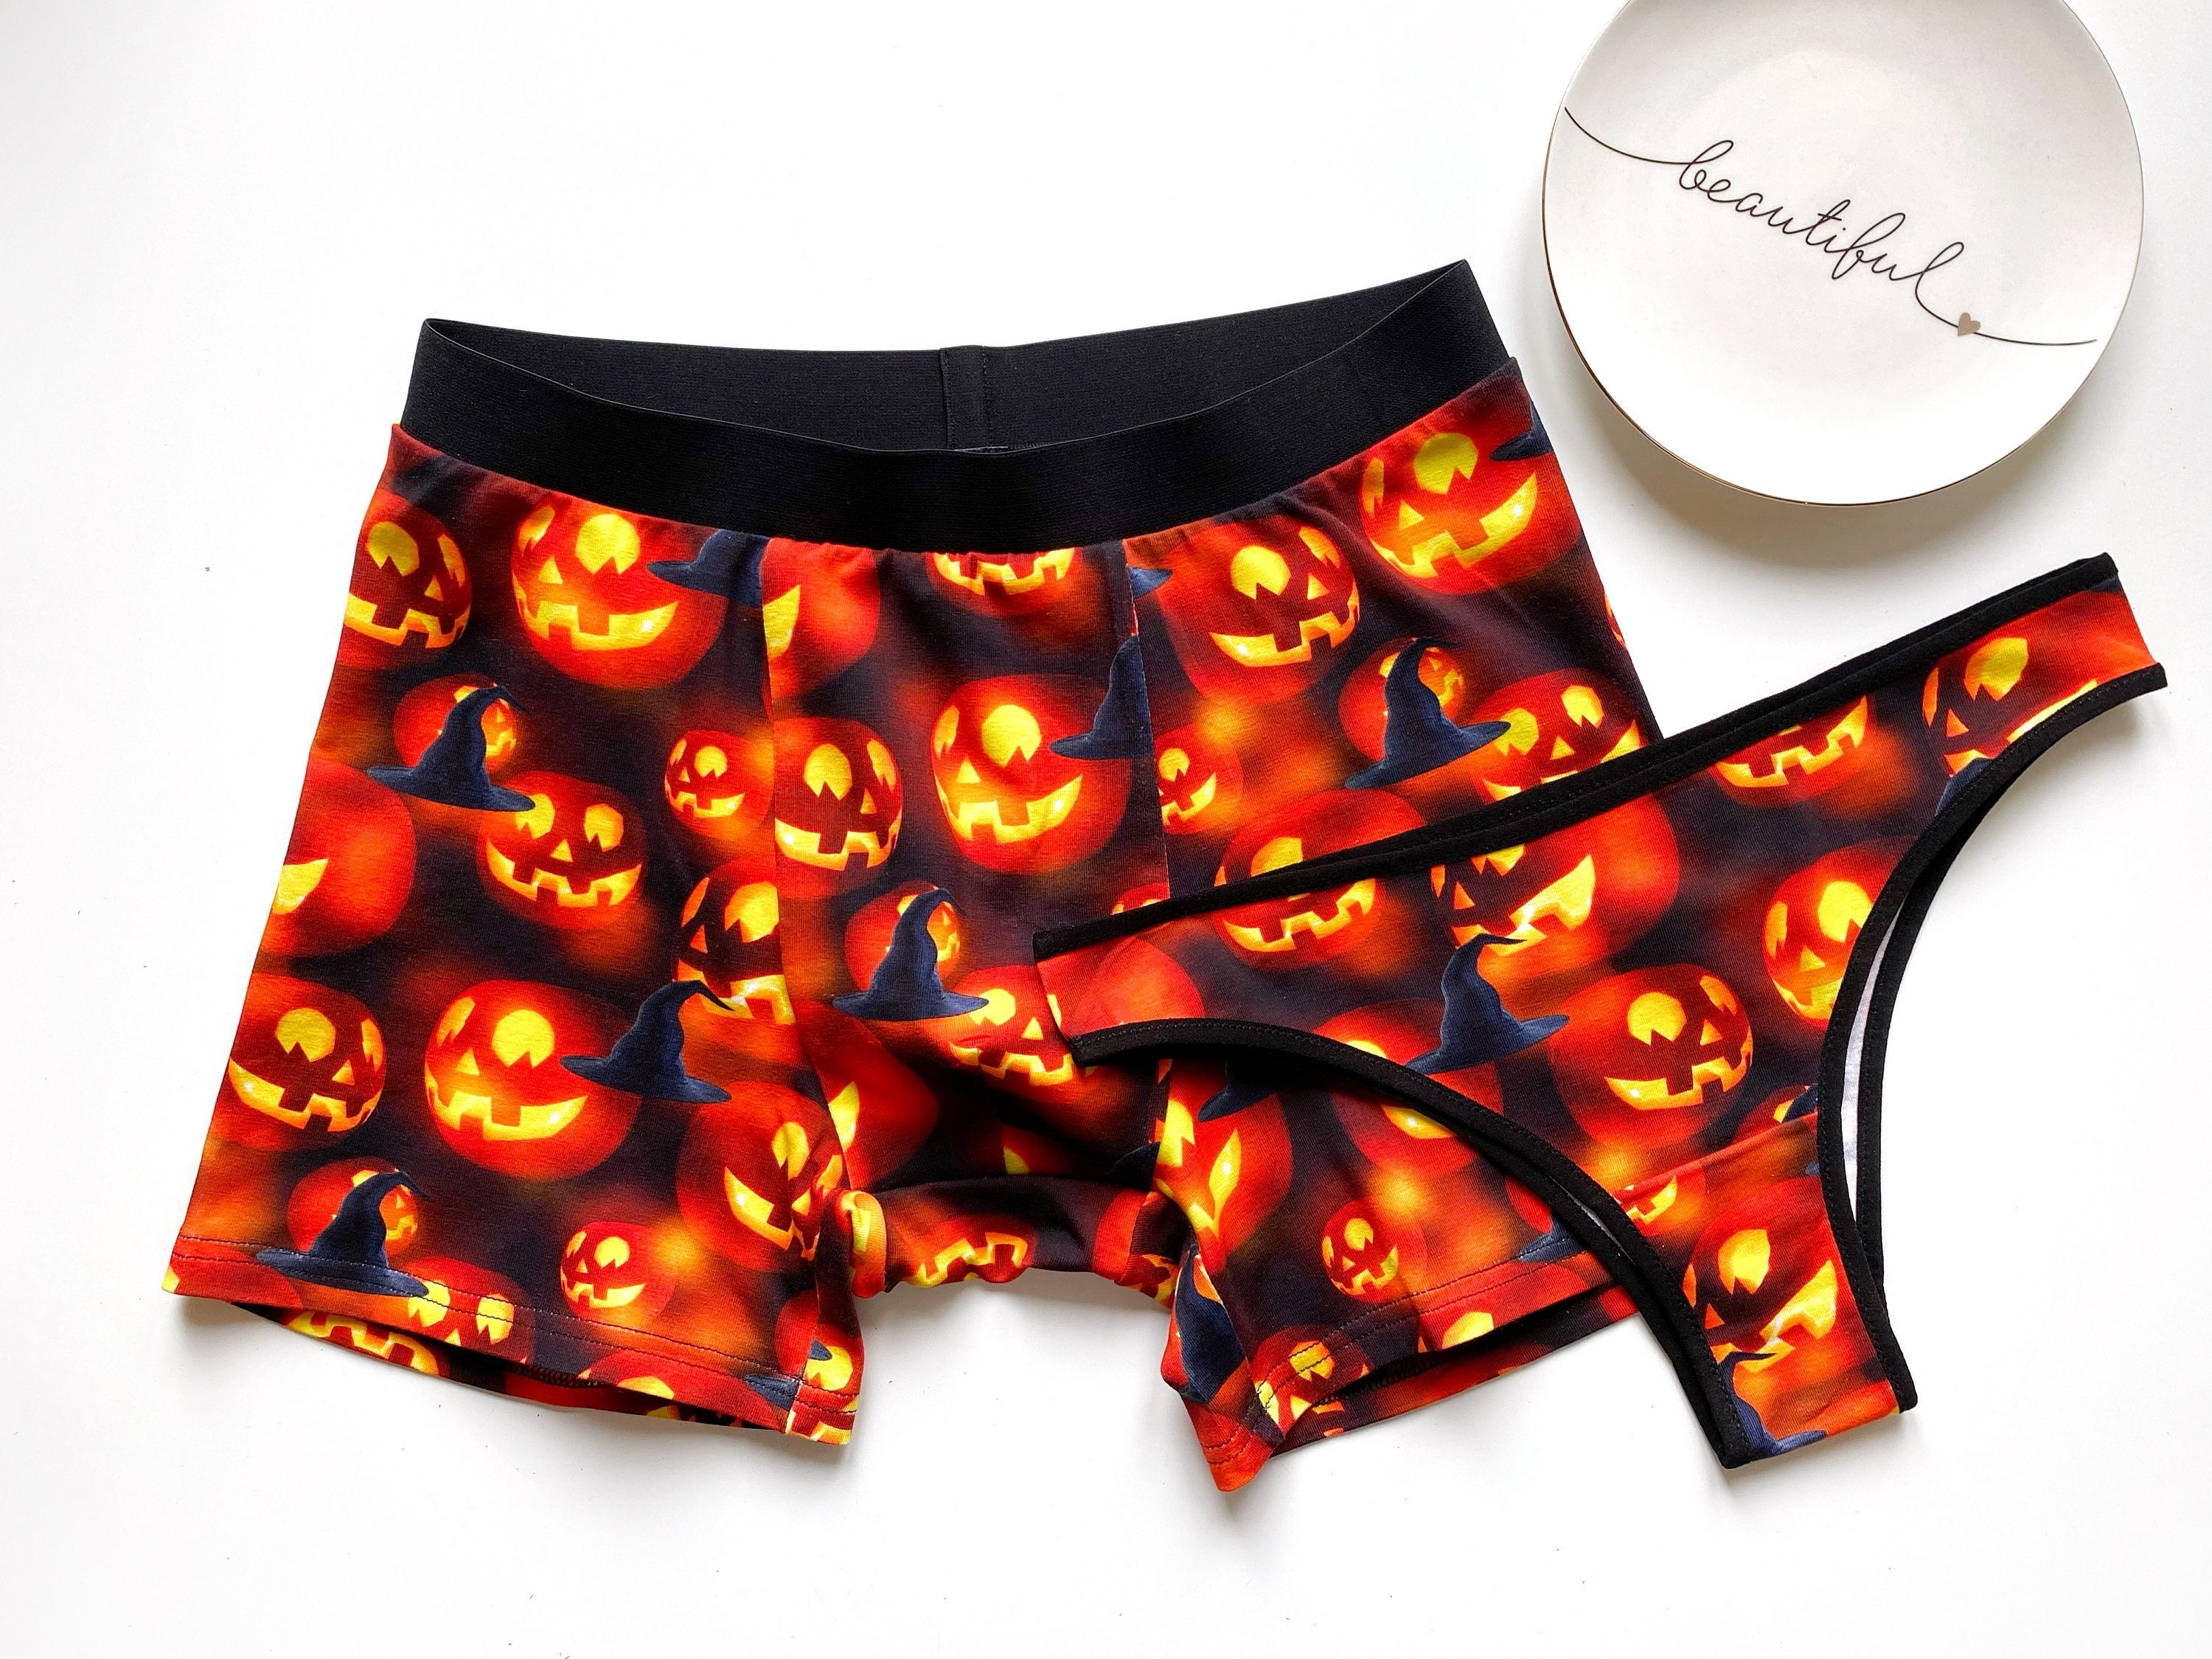 Halloween Matching Underwear for Couple, Funny Couple Briefs With Pumpkin  Print, Sexy Cotton Underwear for Him and Her, Halloween Party Item 